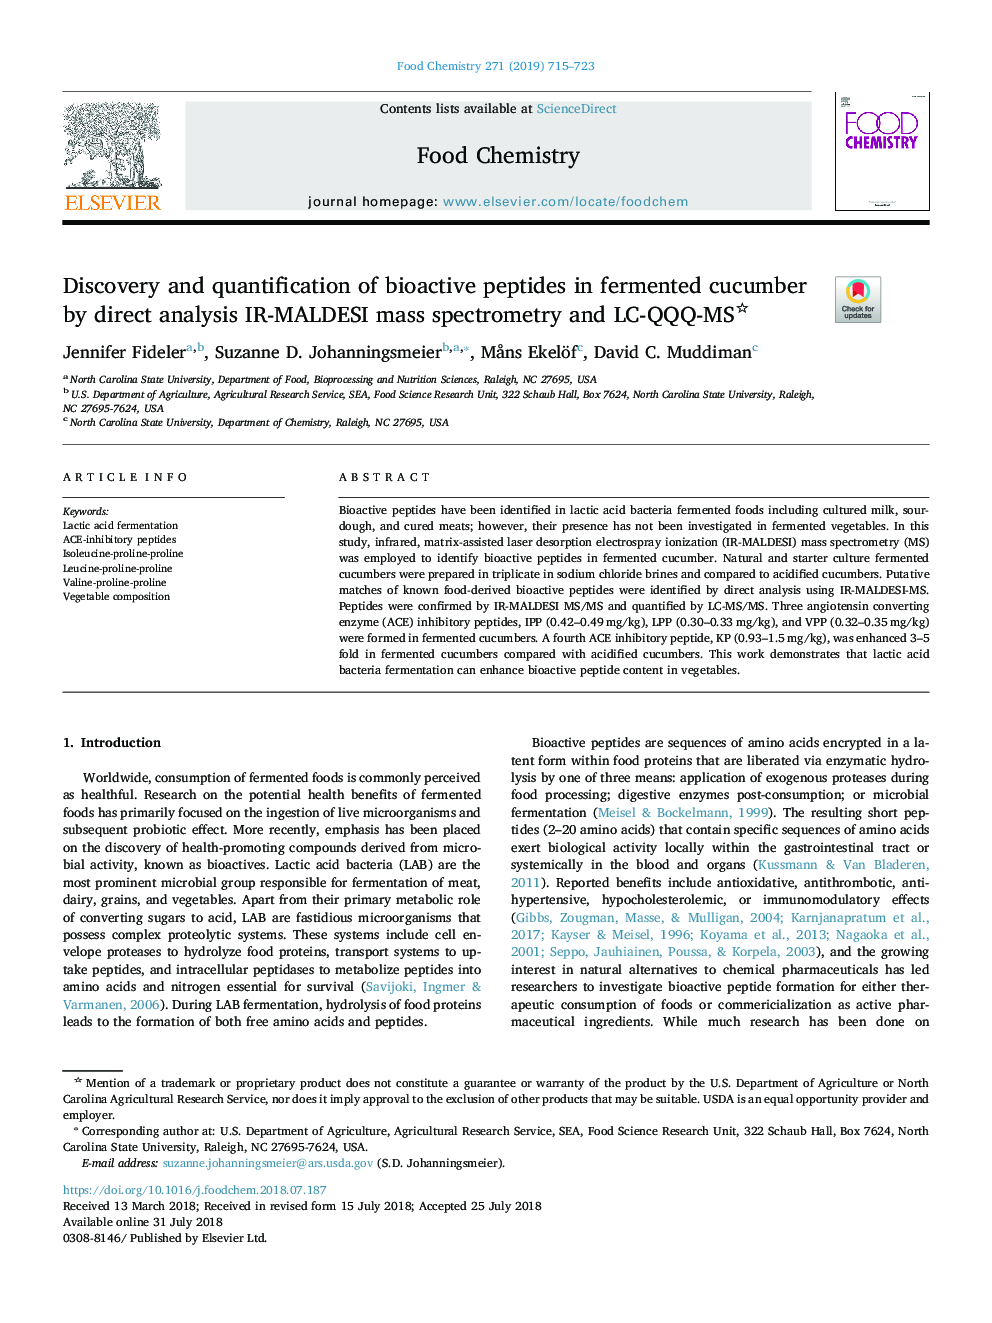 Discovery and quantification of bioactive peptides in fermented cucumber by direct analysis IR-MALDESI mass spectrometry and LC-QQQ-MS